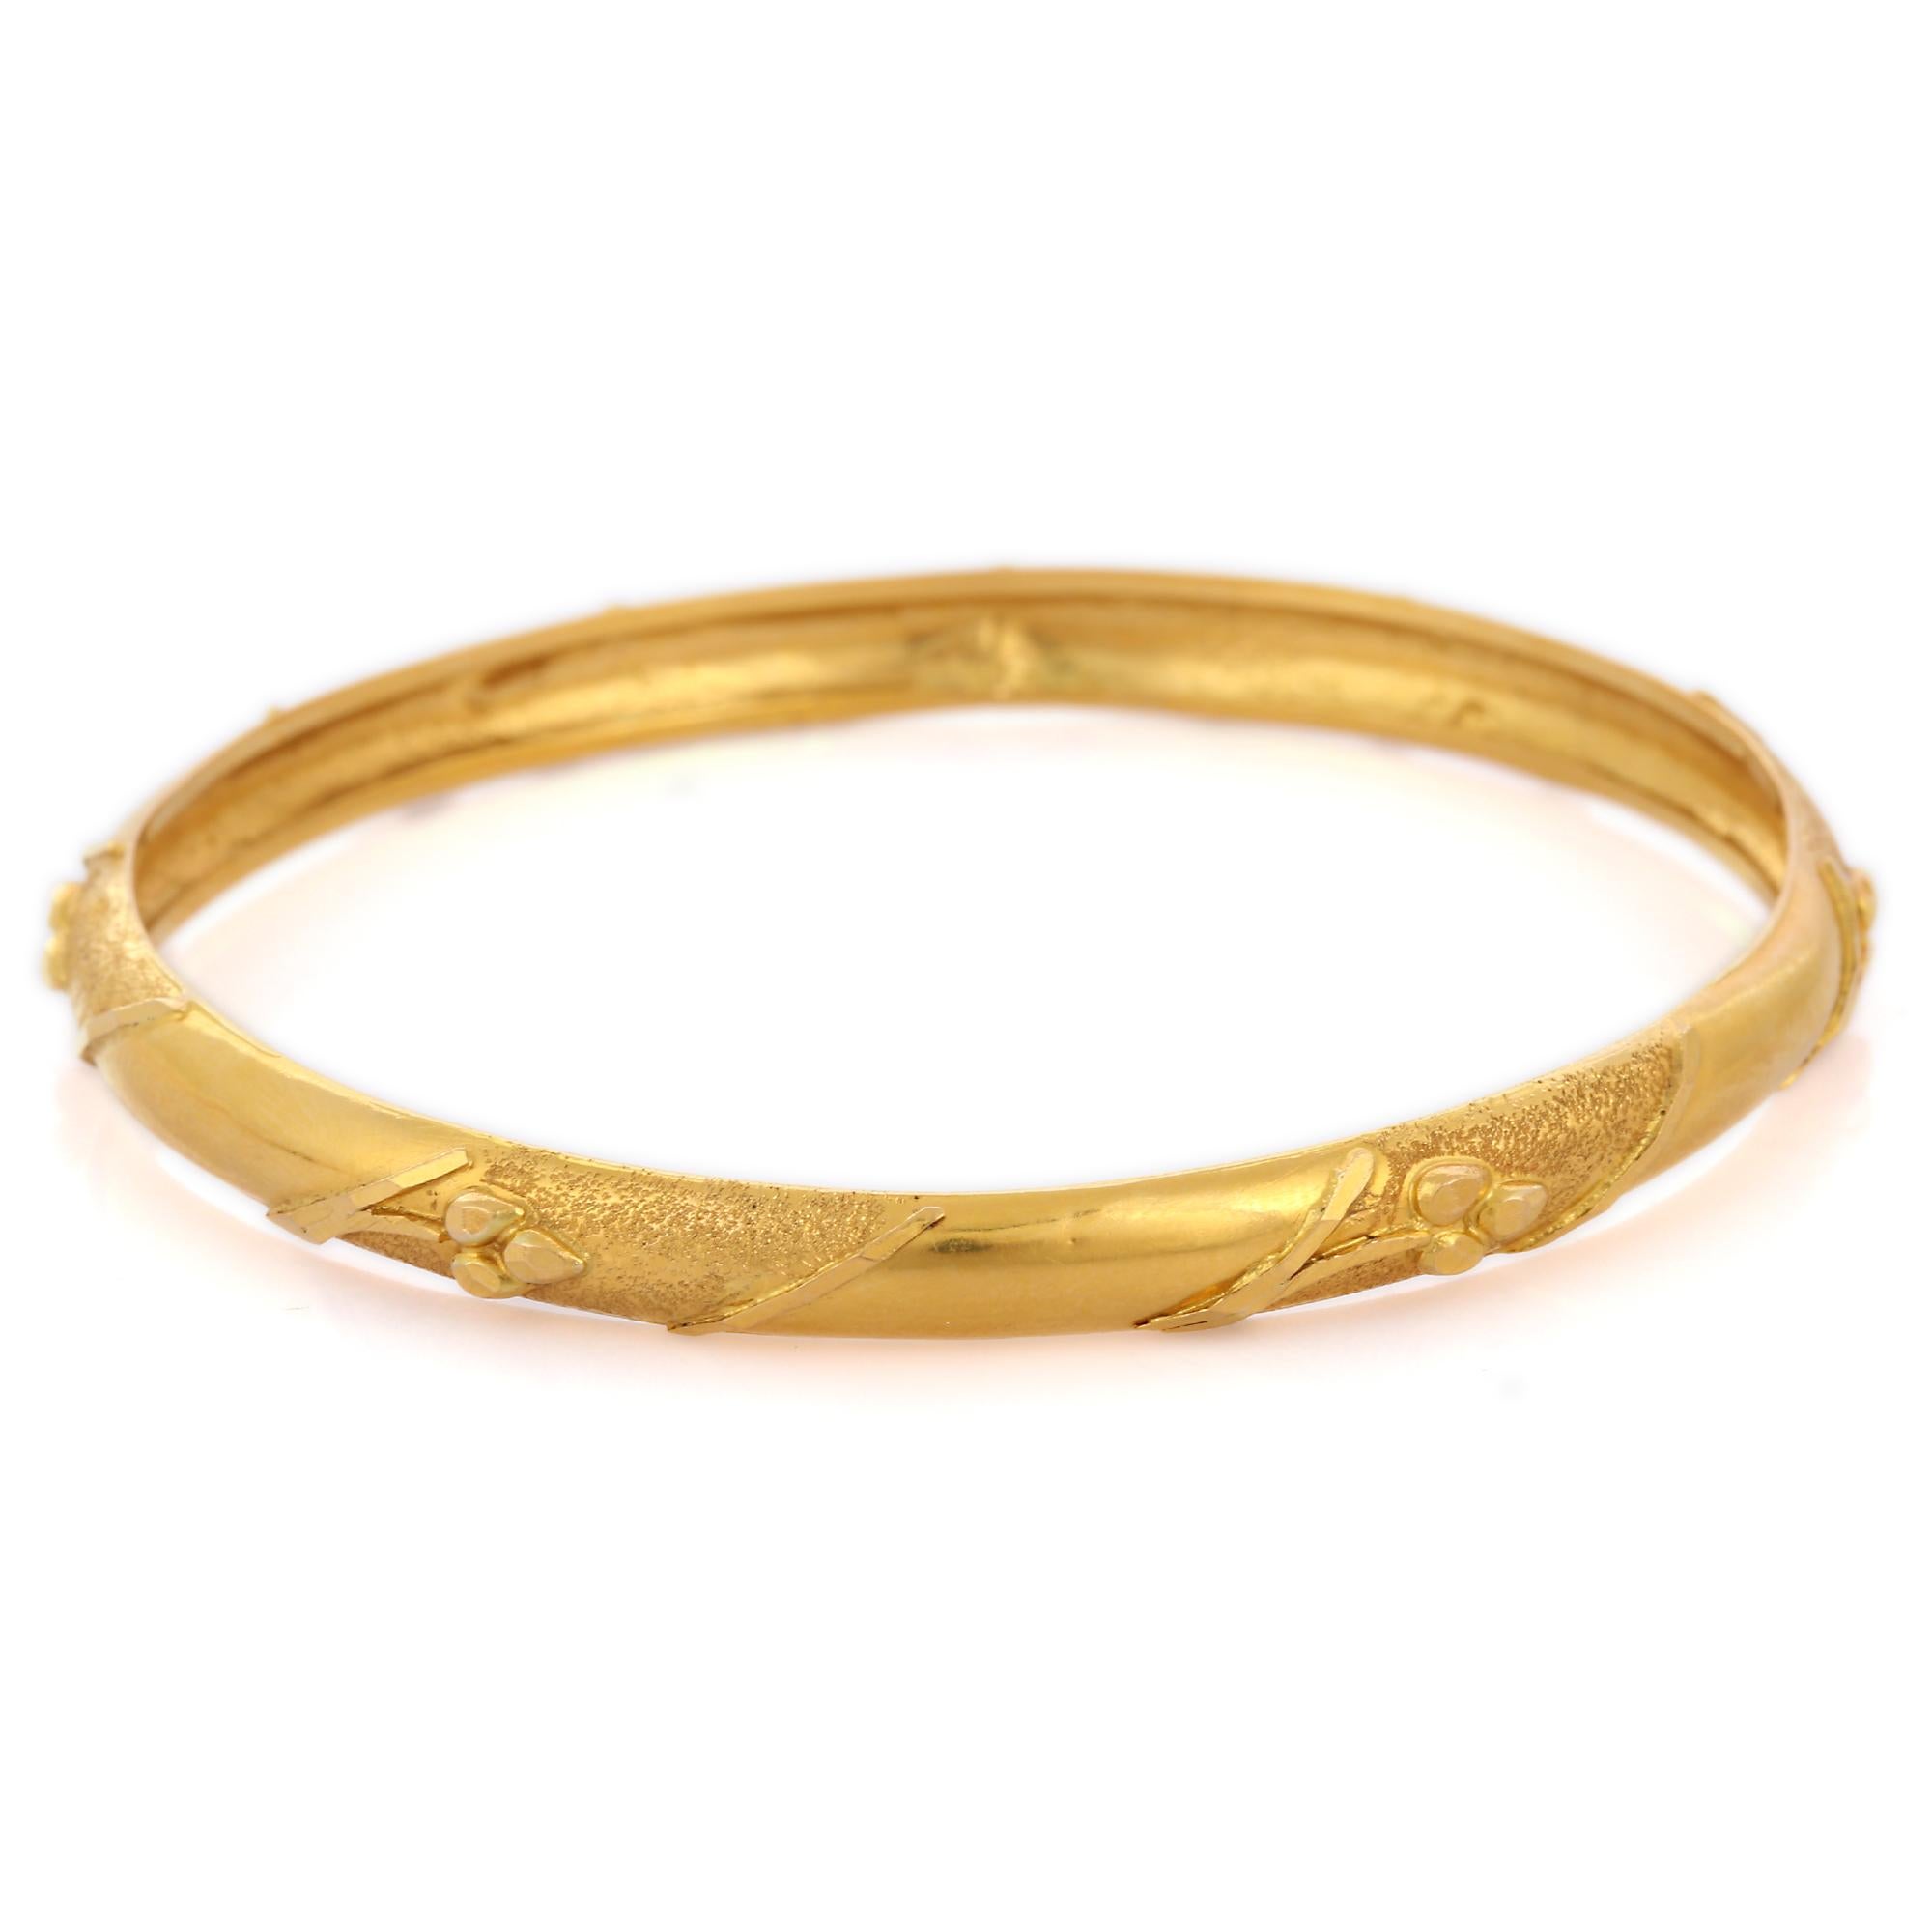 Modern Engraved Bangle in 18K Gold. It’s a great jewelry ornament to wear on occasions and at the same time works as a wonderful gift for your loved ones. These lovely statement pieces are perfect generation jewelry to pass on.
Bangles feel